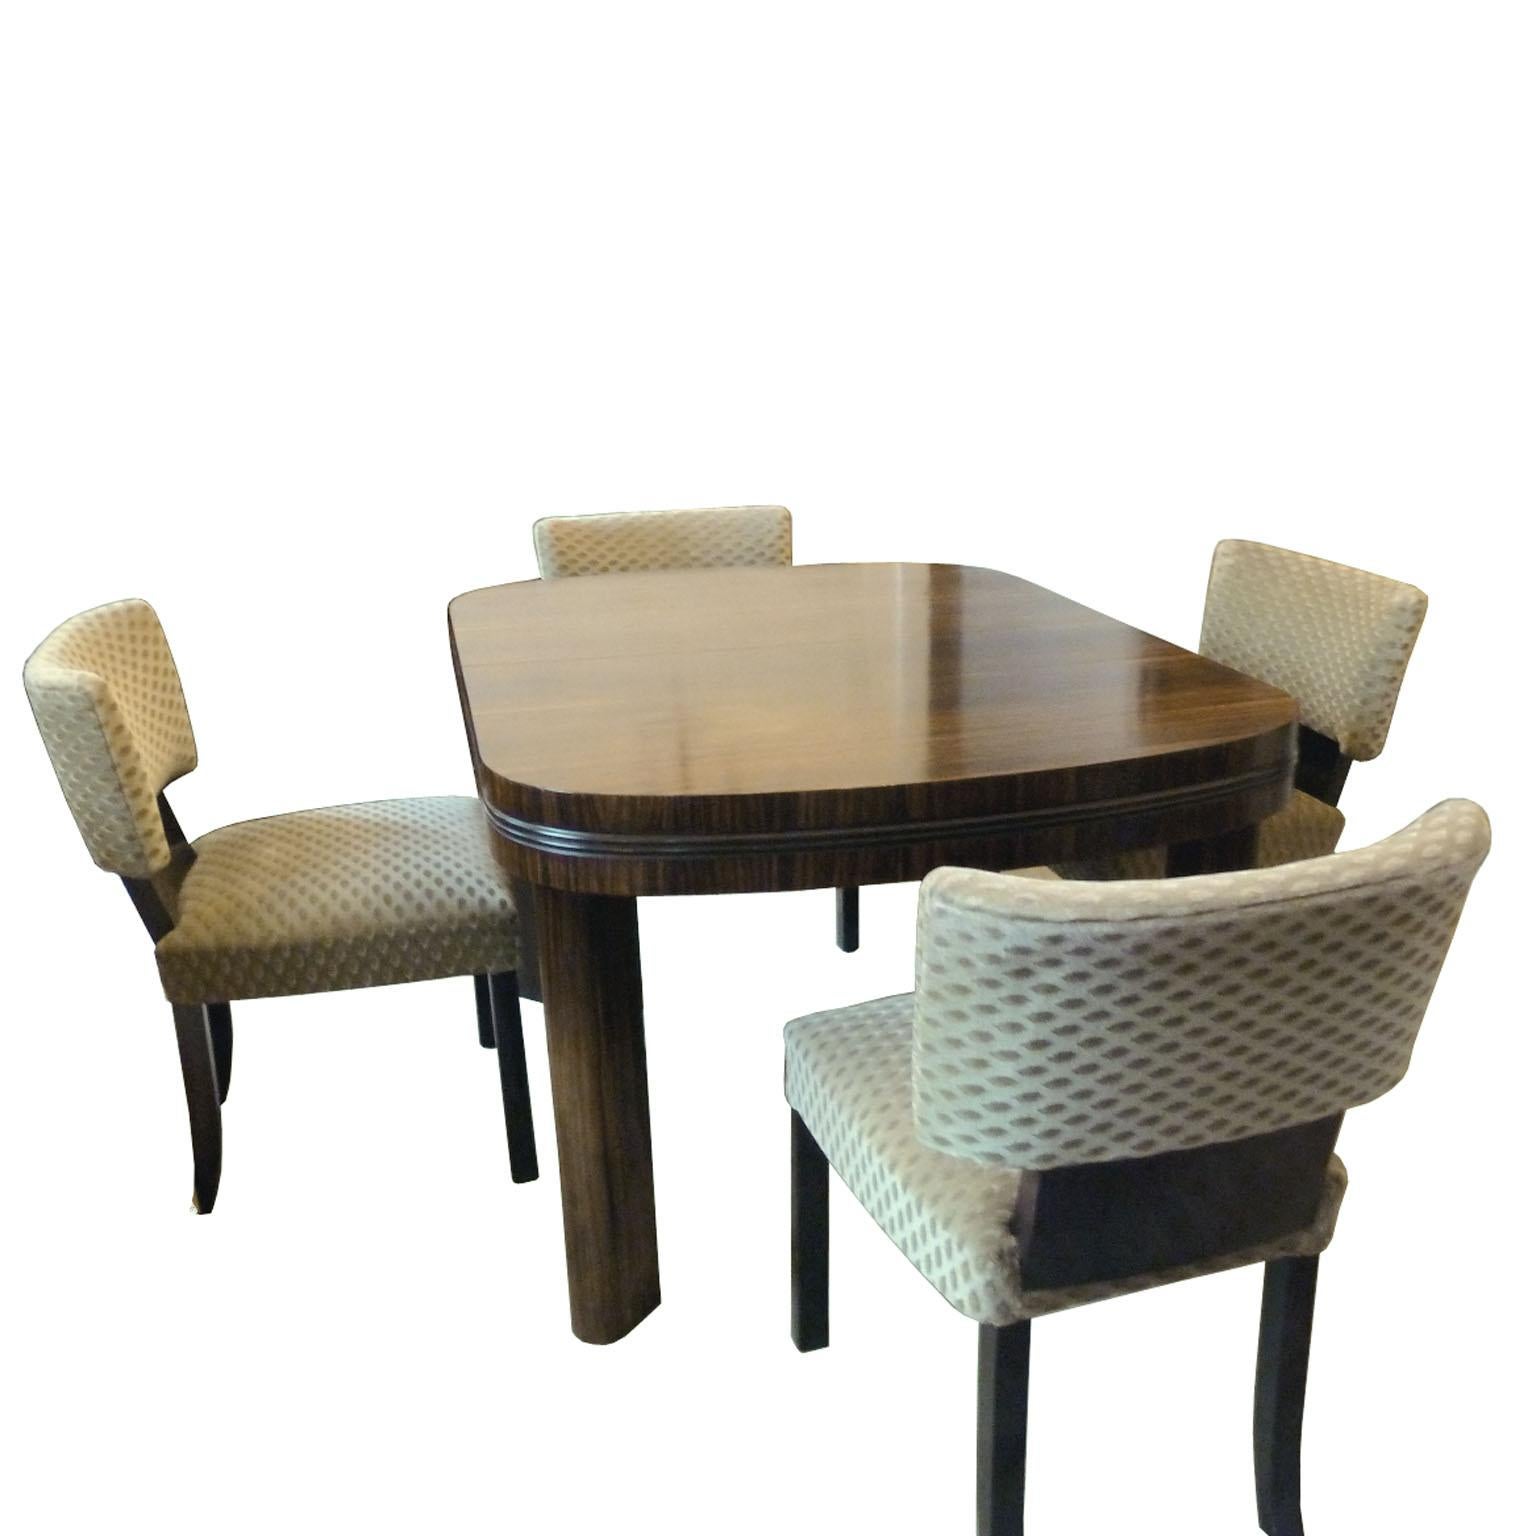 Set of four Art Deco dining room chairs. Bruno Paul design, Germany, circa 1930
Extraordinary and comfortable dining room chairs, Makassar veneer body with thick green velour upholstery.
Condition: Good original condition with normal wear of time,